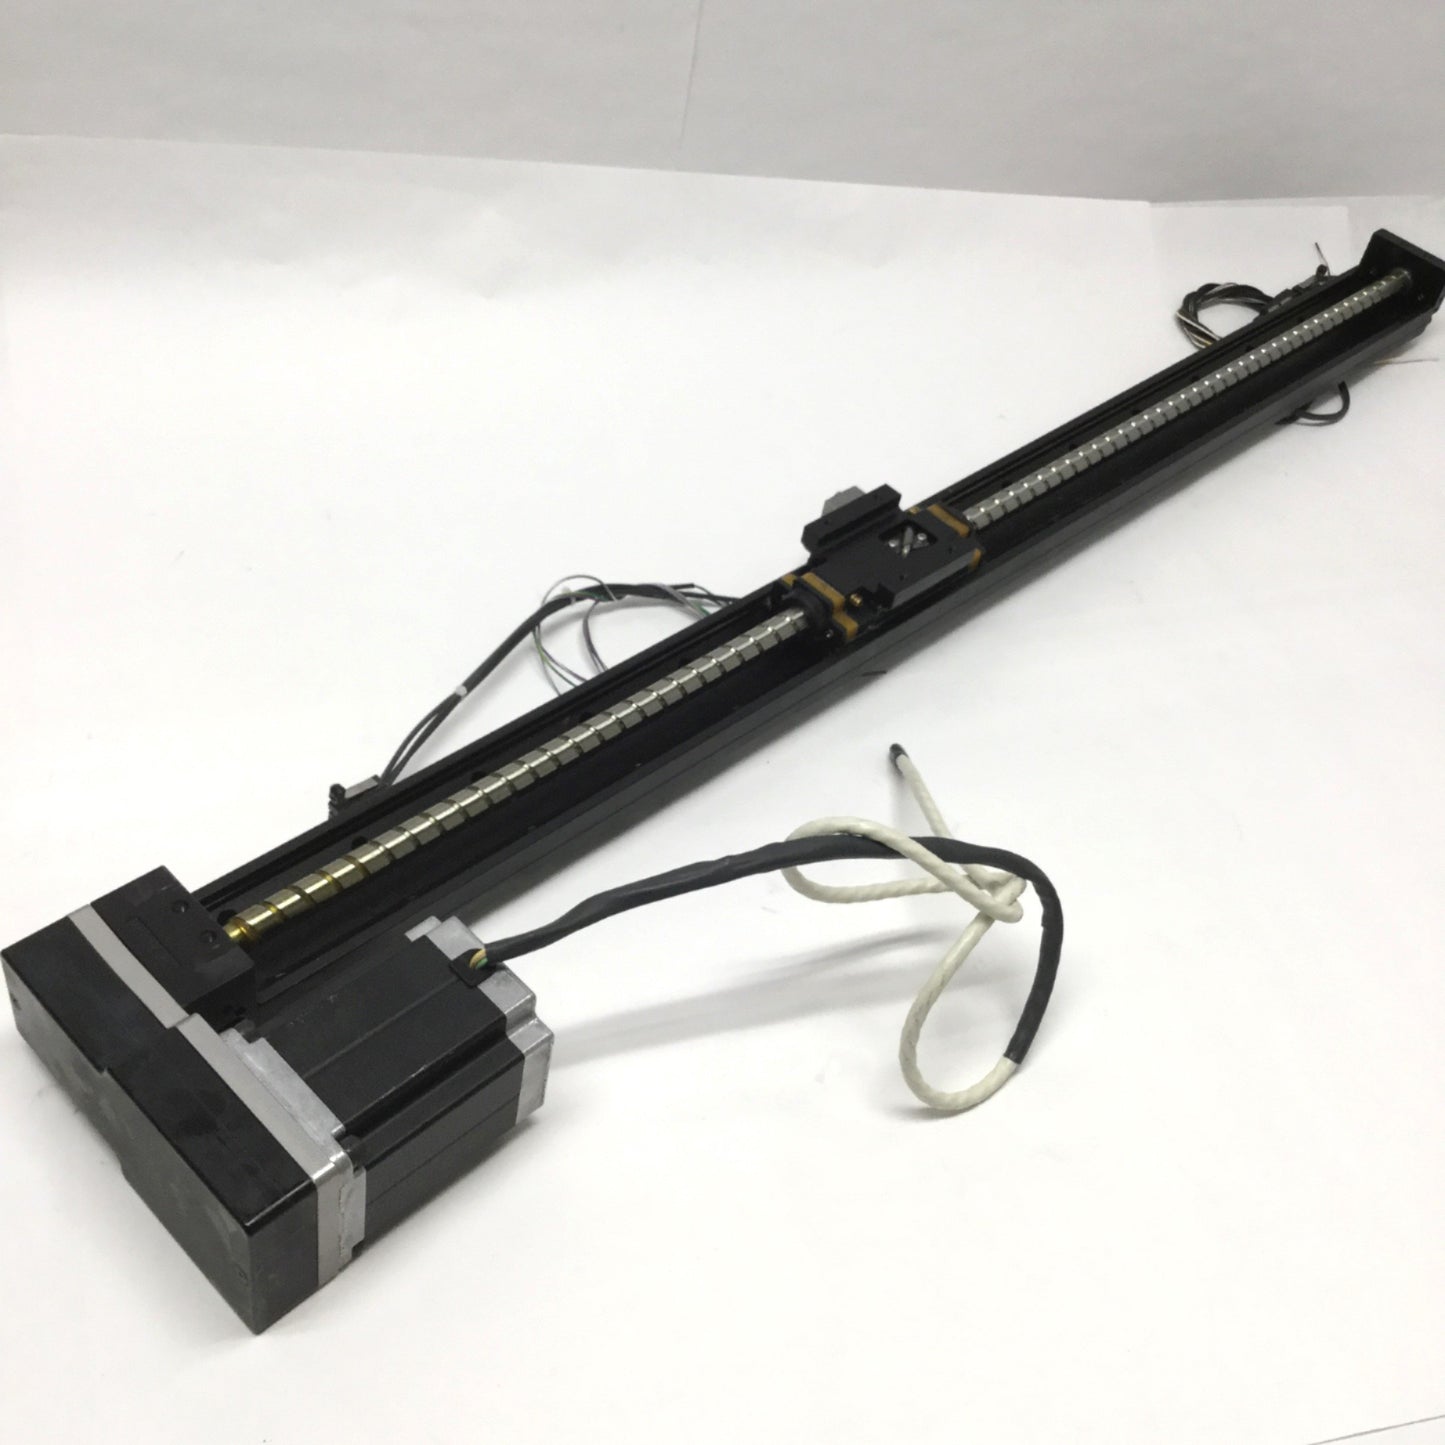 Used NSK MCM05060H10K Monocarrier Linear Ball Screw Actuator Positioner 600mm Travel